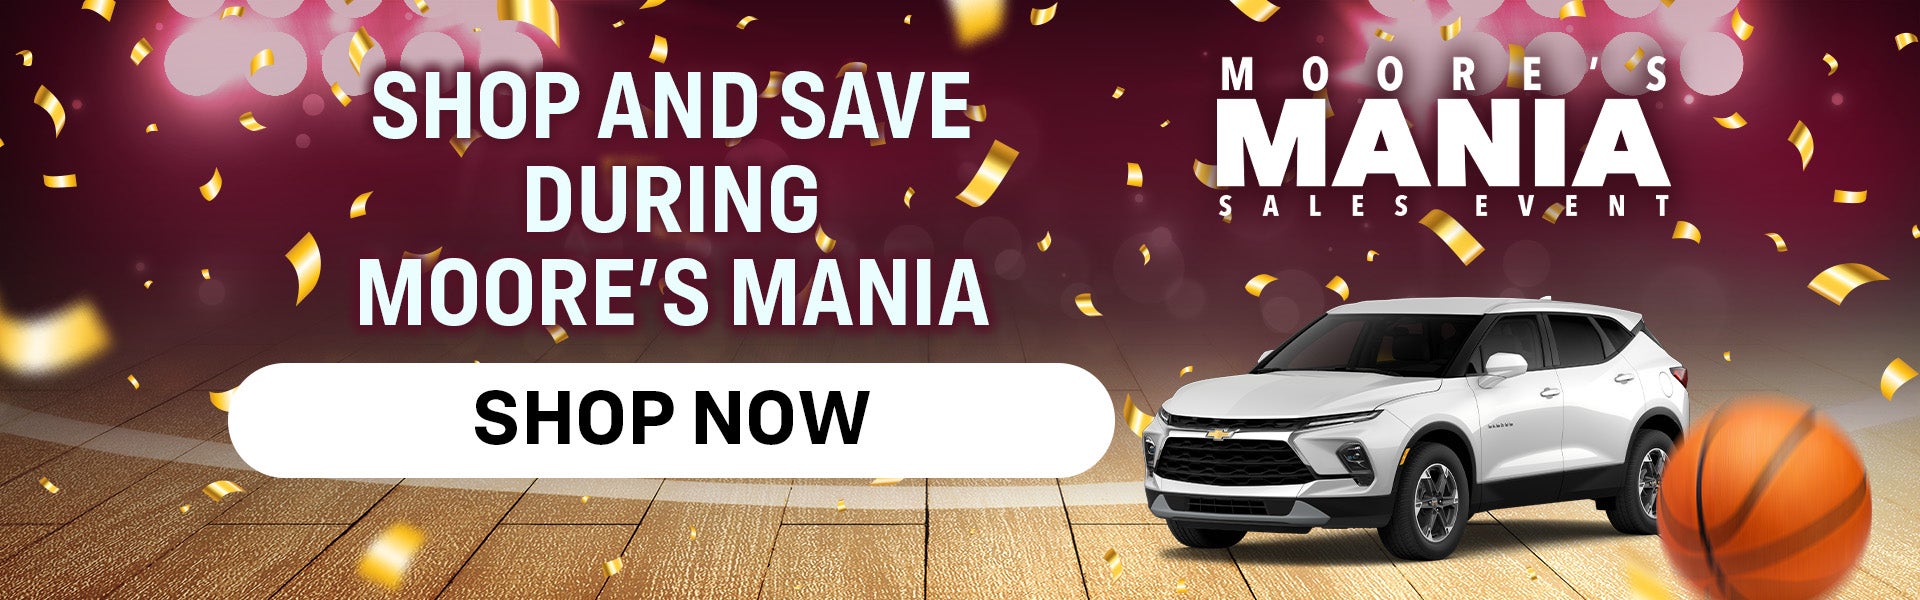 Shop and Save during Moore's Mania